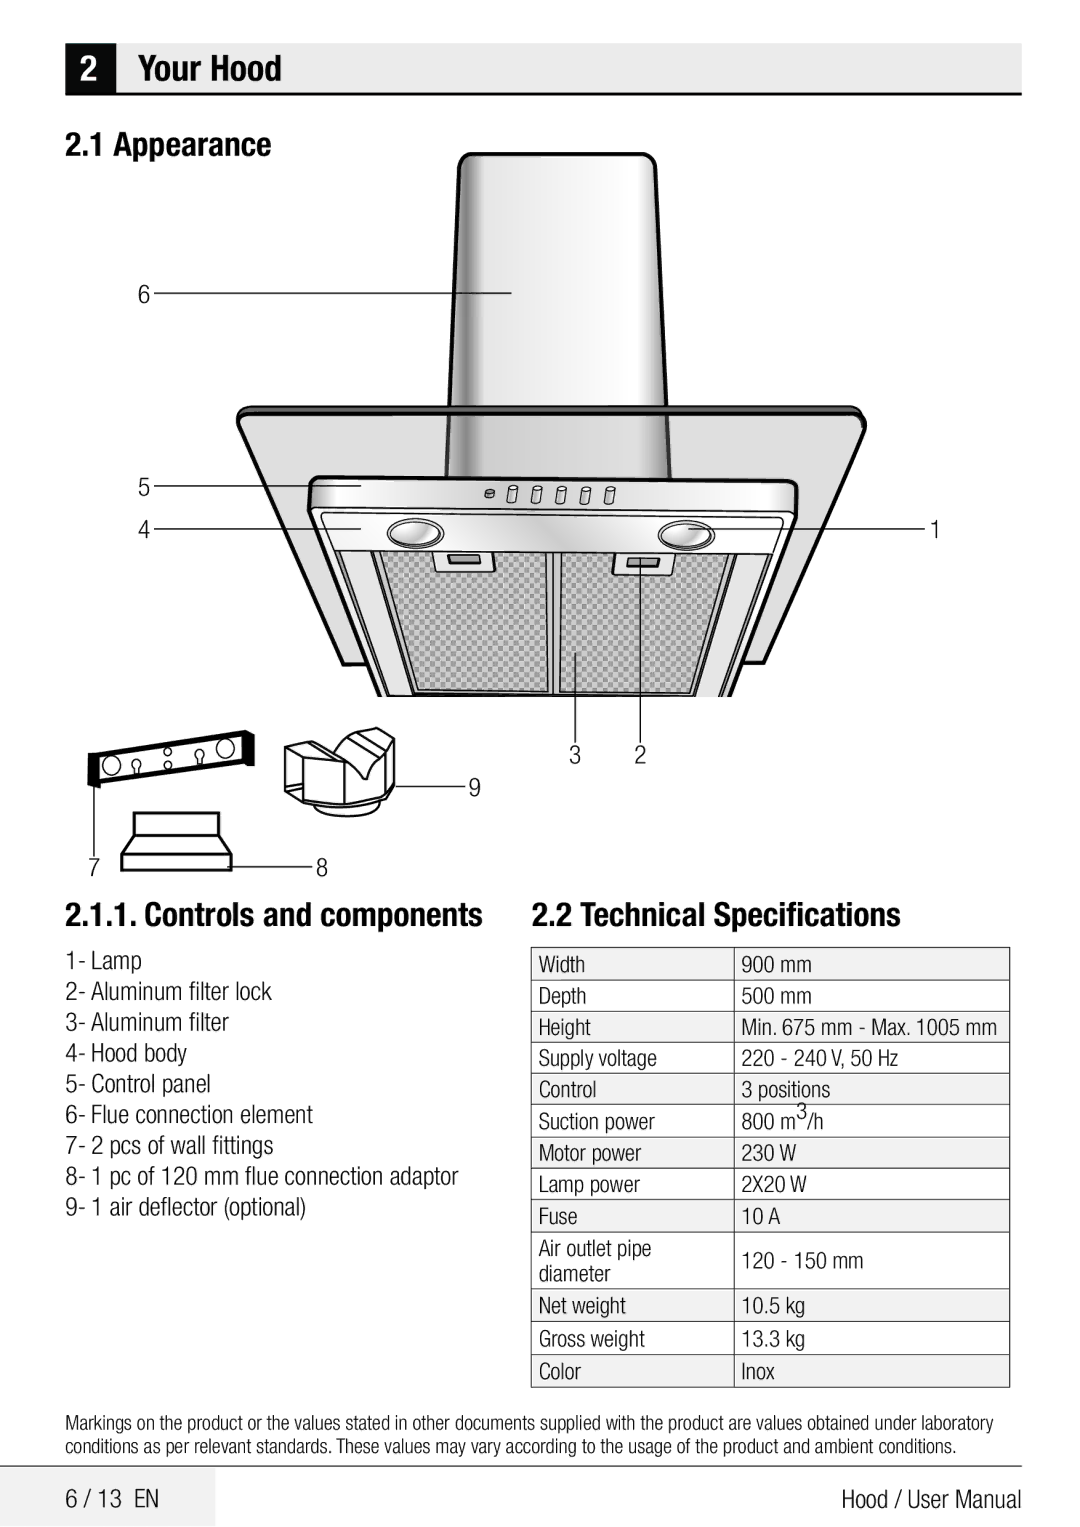 Beko CWB 9601 X user manual Your Hood, Appearance Controls and components, Technical Specifications 